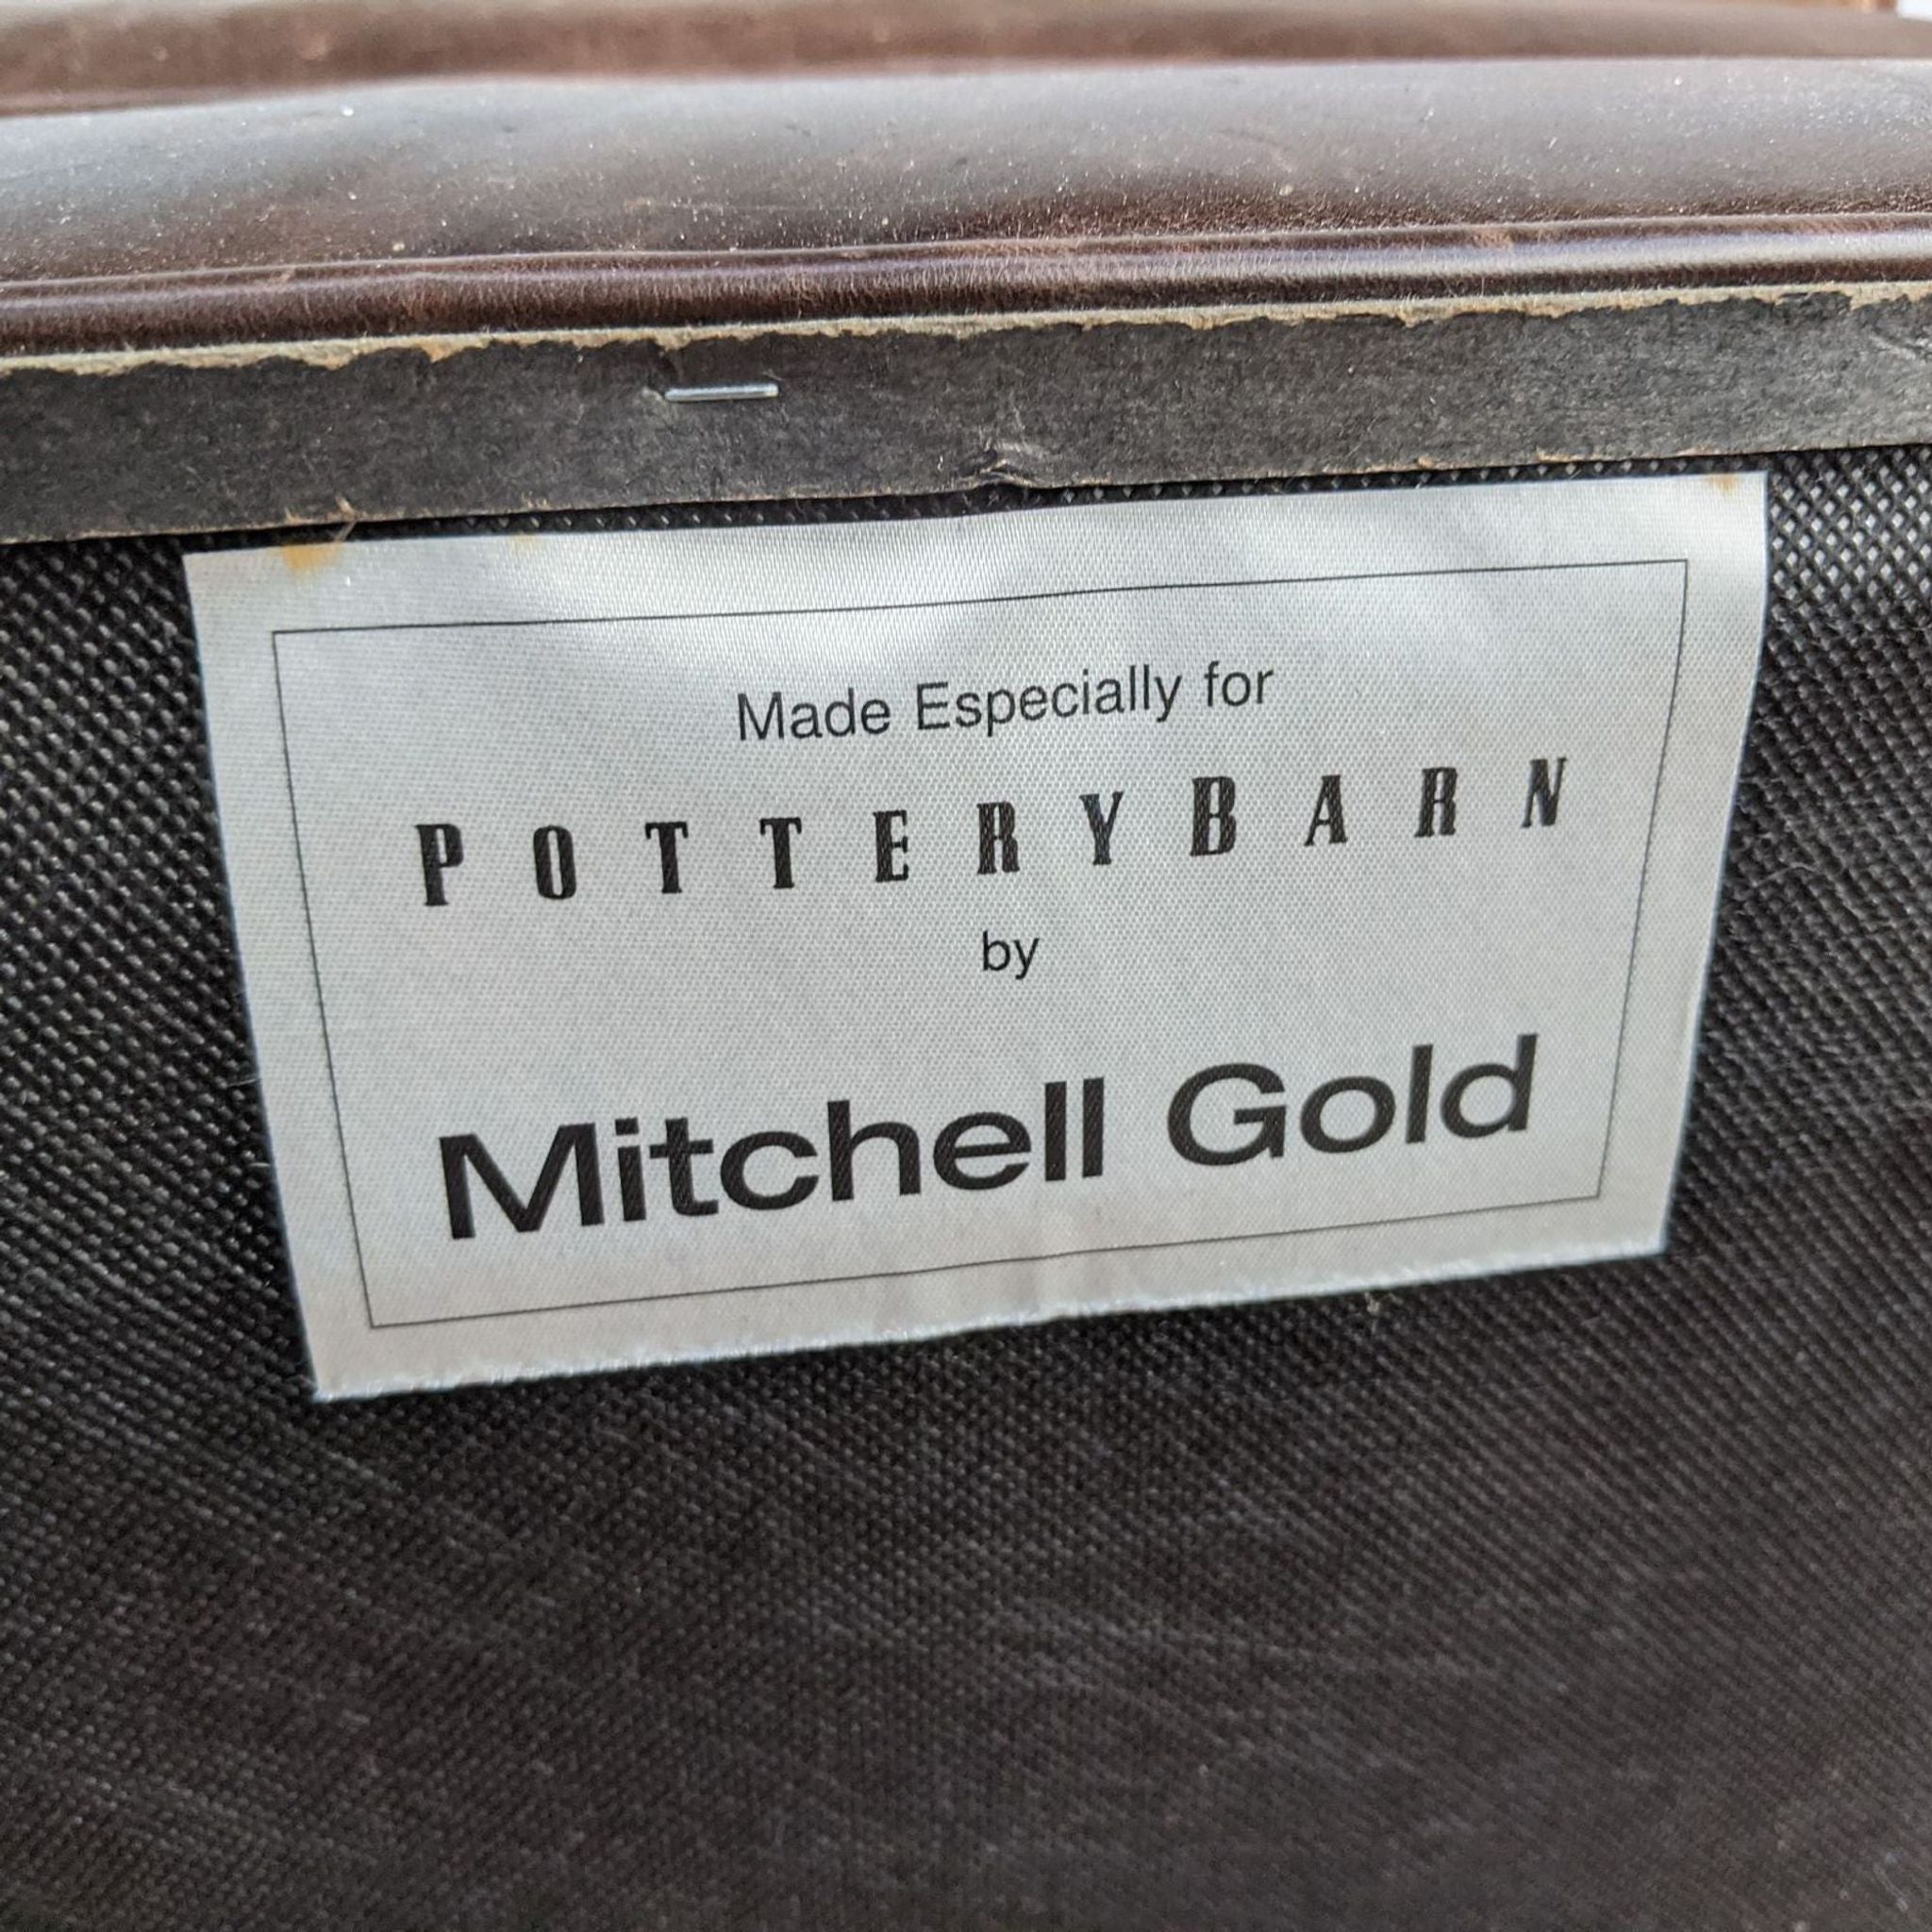 Label on furniture stating "Made especially for POTTERYBARN by Mitchell Gold" indicating brand and manufacturer.